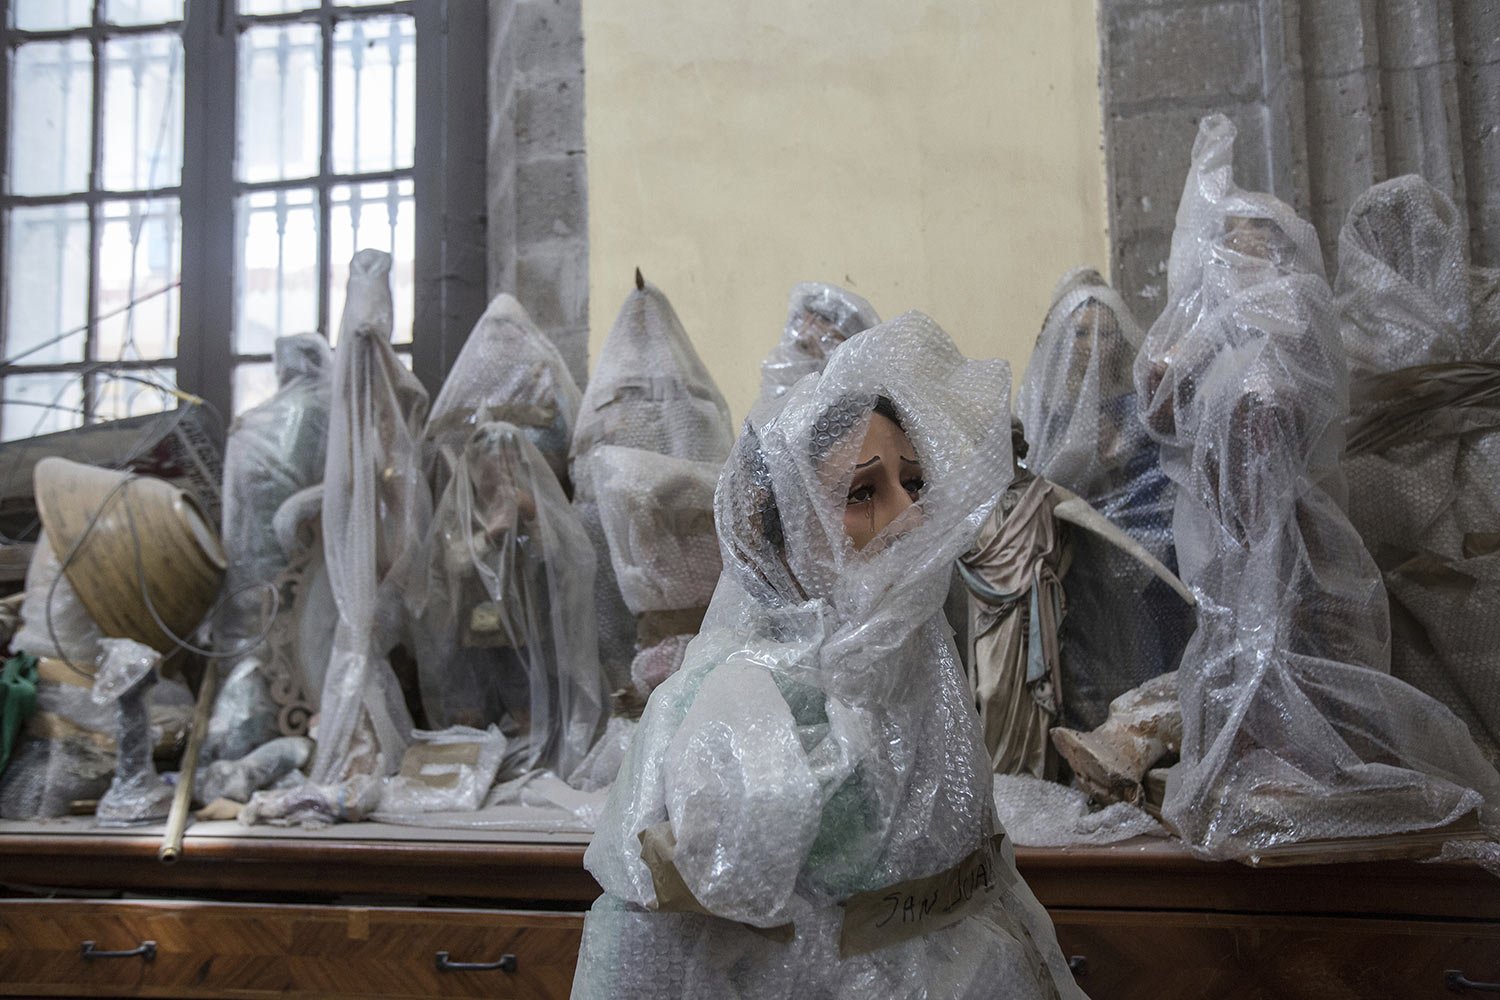  Religious statues protected with bubble wrap sit in storage inside Our Lady of the Angels Catholic church, in Mexico City, Sunday, Aug. 7, 2022. The National Institute of Anthropology and History is funding and carrying out the restoration of earthq